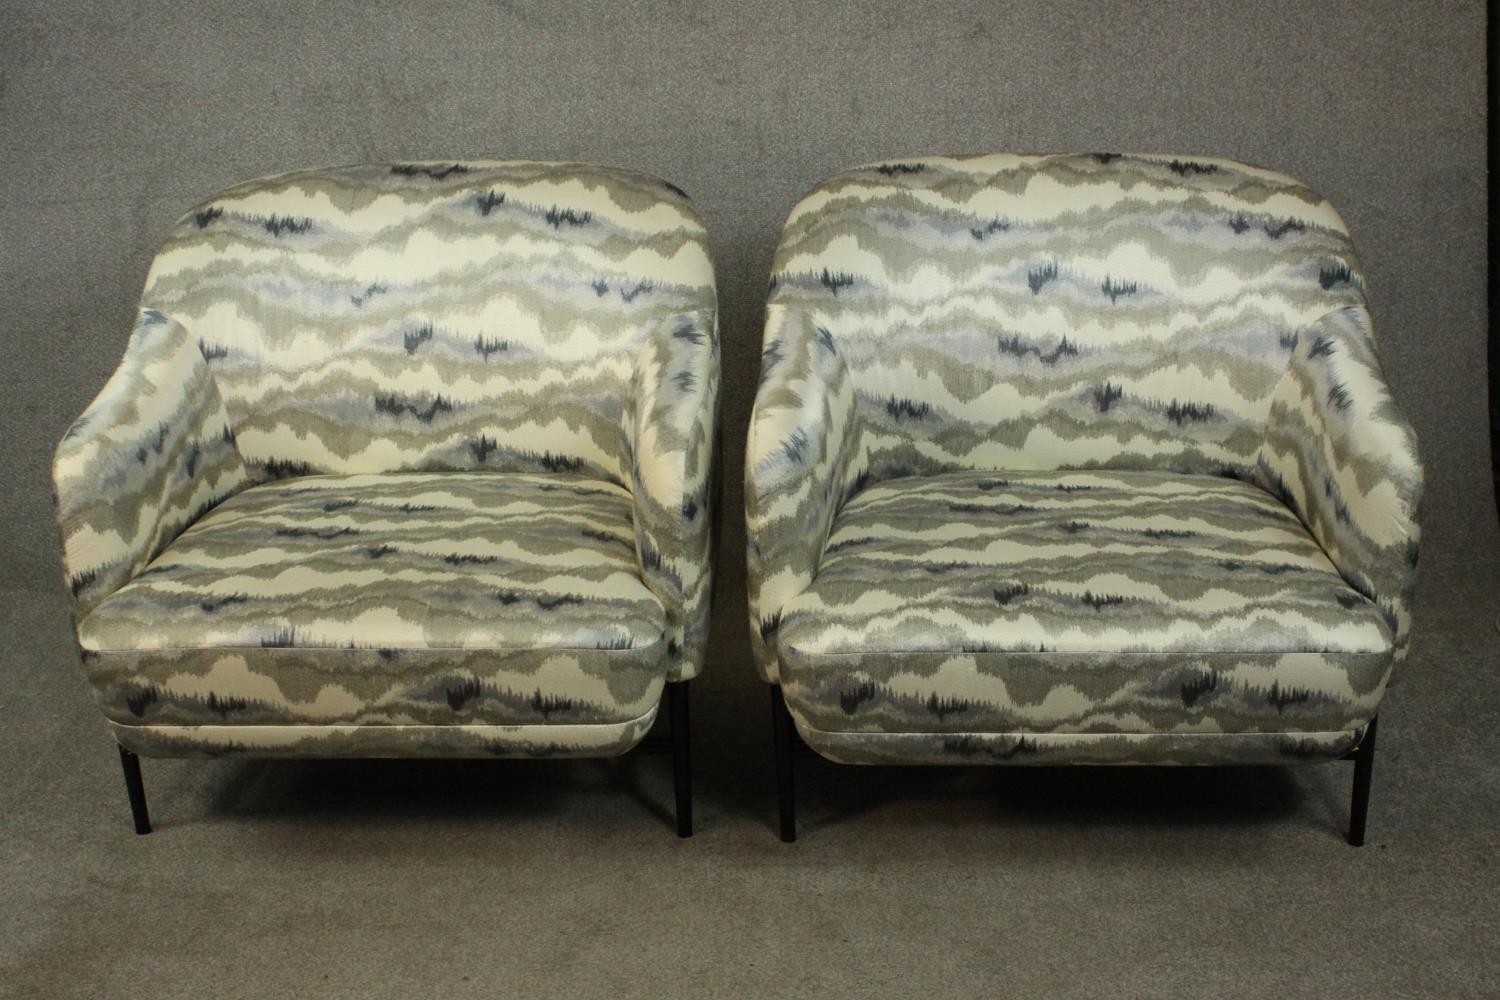 A pair of retro styled armchairs, with patterned upholstery in hues of grey, on a black powder